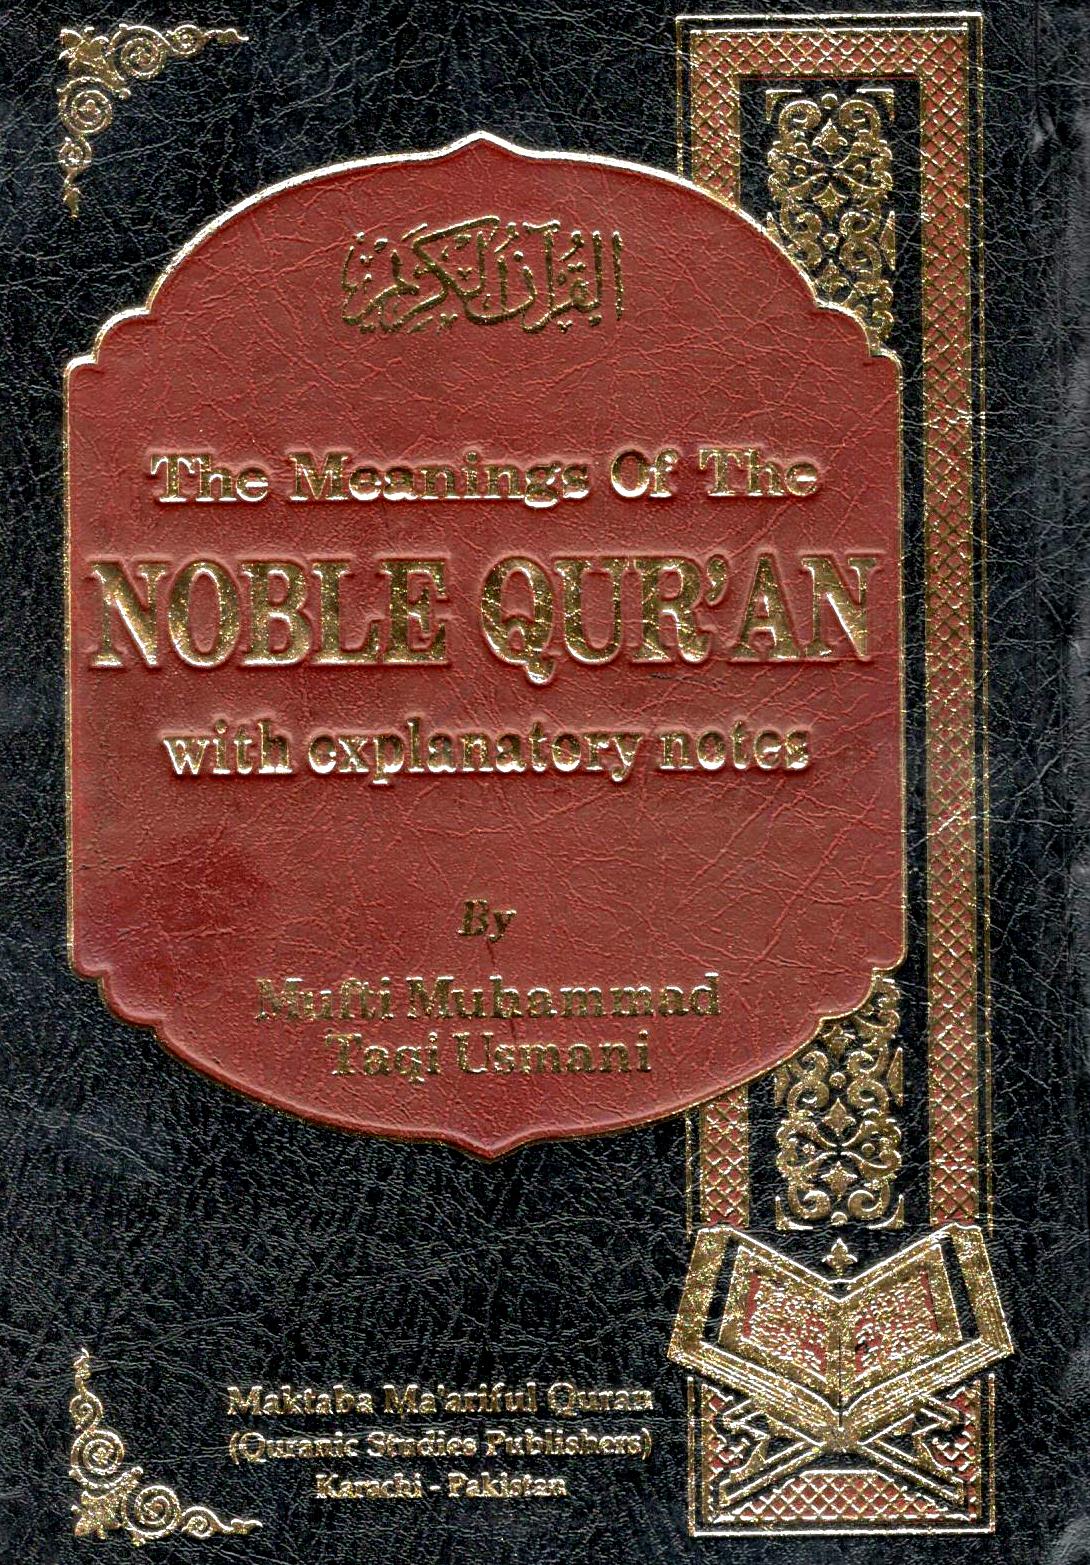 The Meanings of the Noble Qur’an with Explanatory Notes – Mufti M. Taqi Usmani - 15x20cms